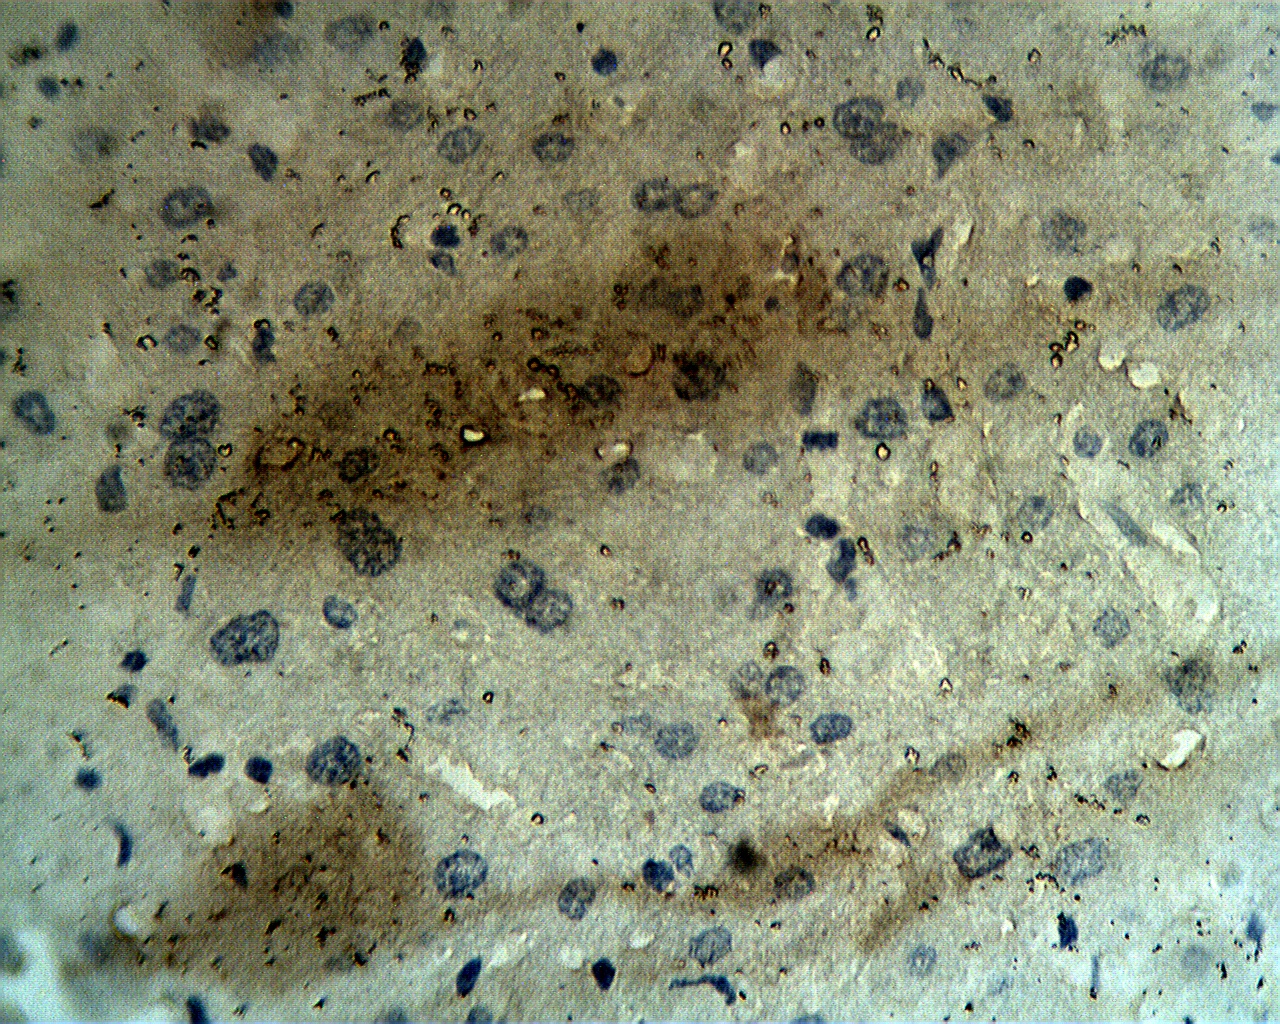 Staining on paraffin embedded human hepatocellular carcinoma sections. Primary Ab (immunoaffinity purified) at 10 µg/ml. Antigen retrieval used: 10 mM Na Citrate pH 6.0, 10 minutes pressure cooker method, developed with anti rabbit HRP and DAP substrate.  Counterstained with methyl blue.